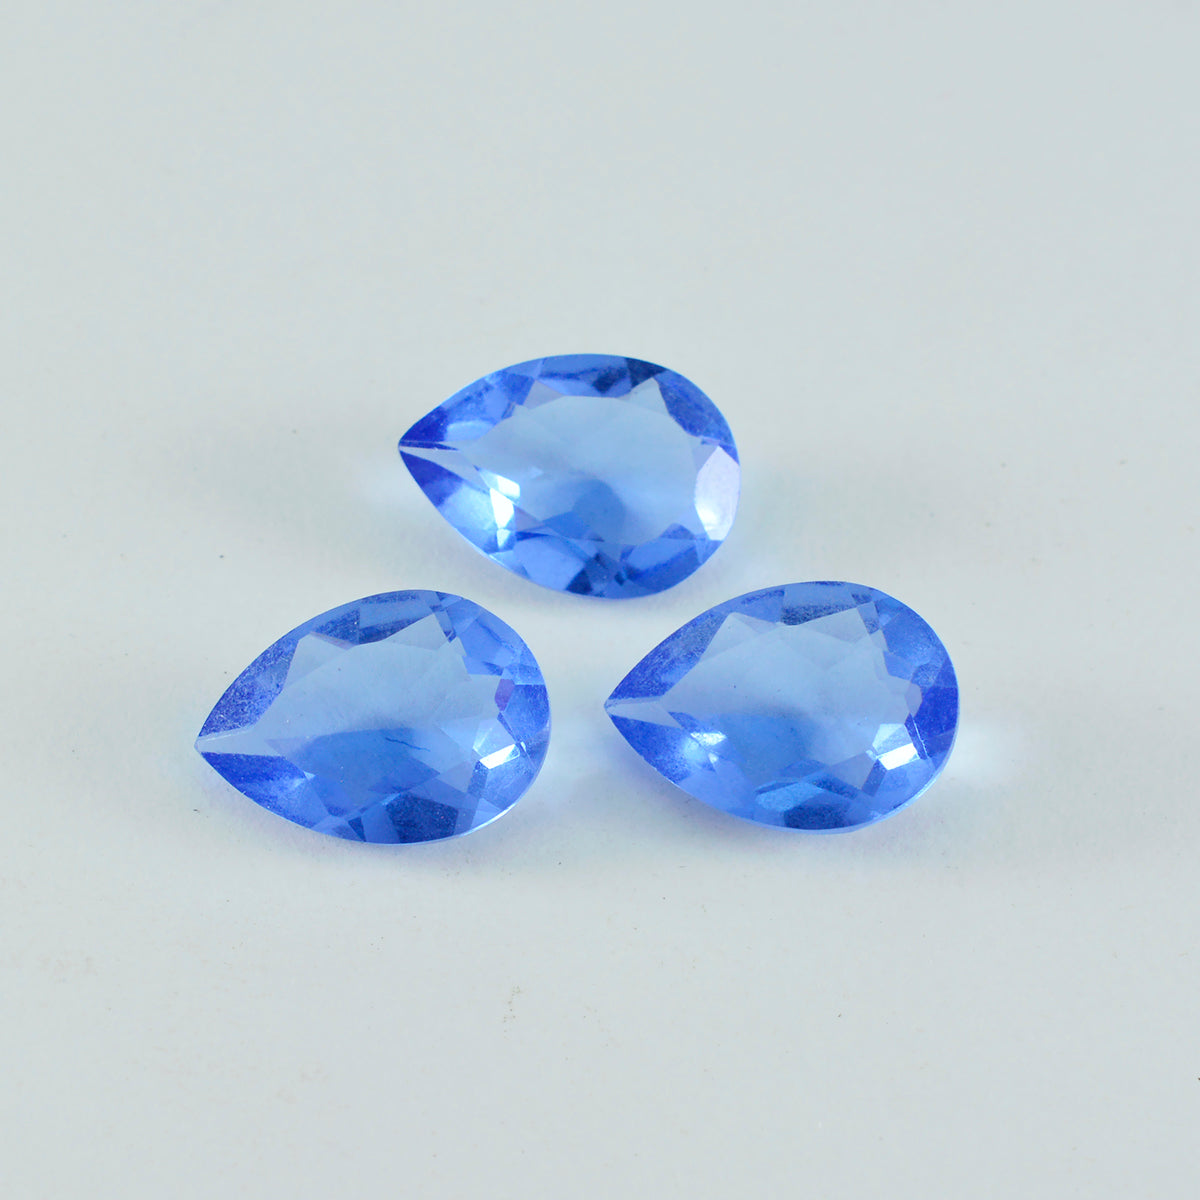 Riyogems 1PC Blue Sapphire CZ Faceted 12x16 mm Pear Shape handsome Quality Loose Stone